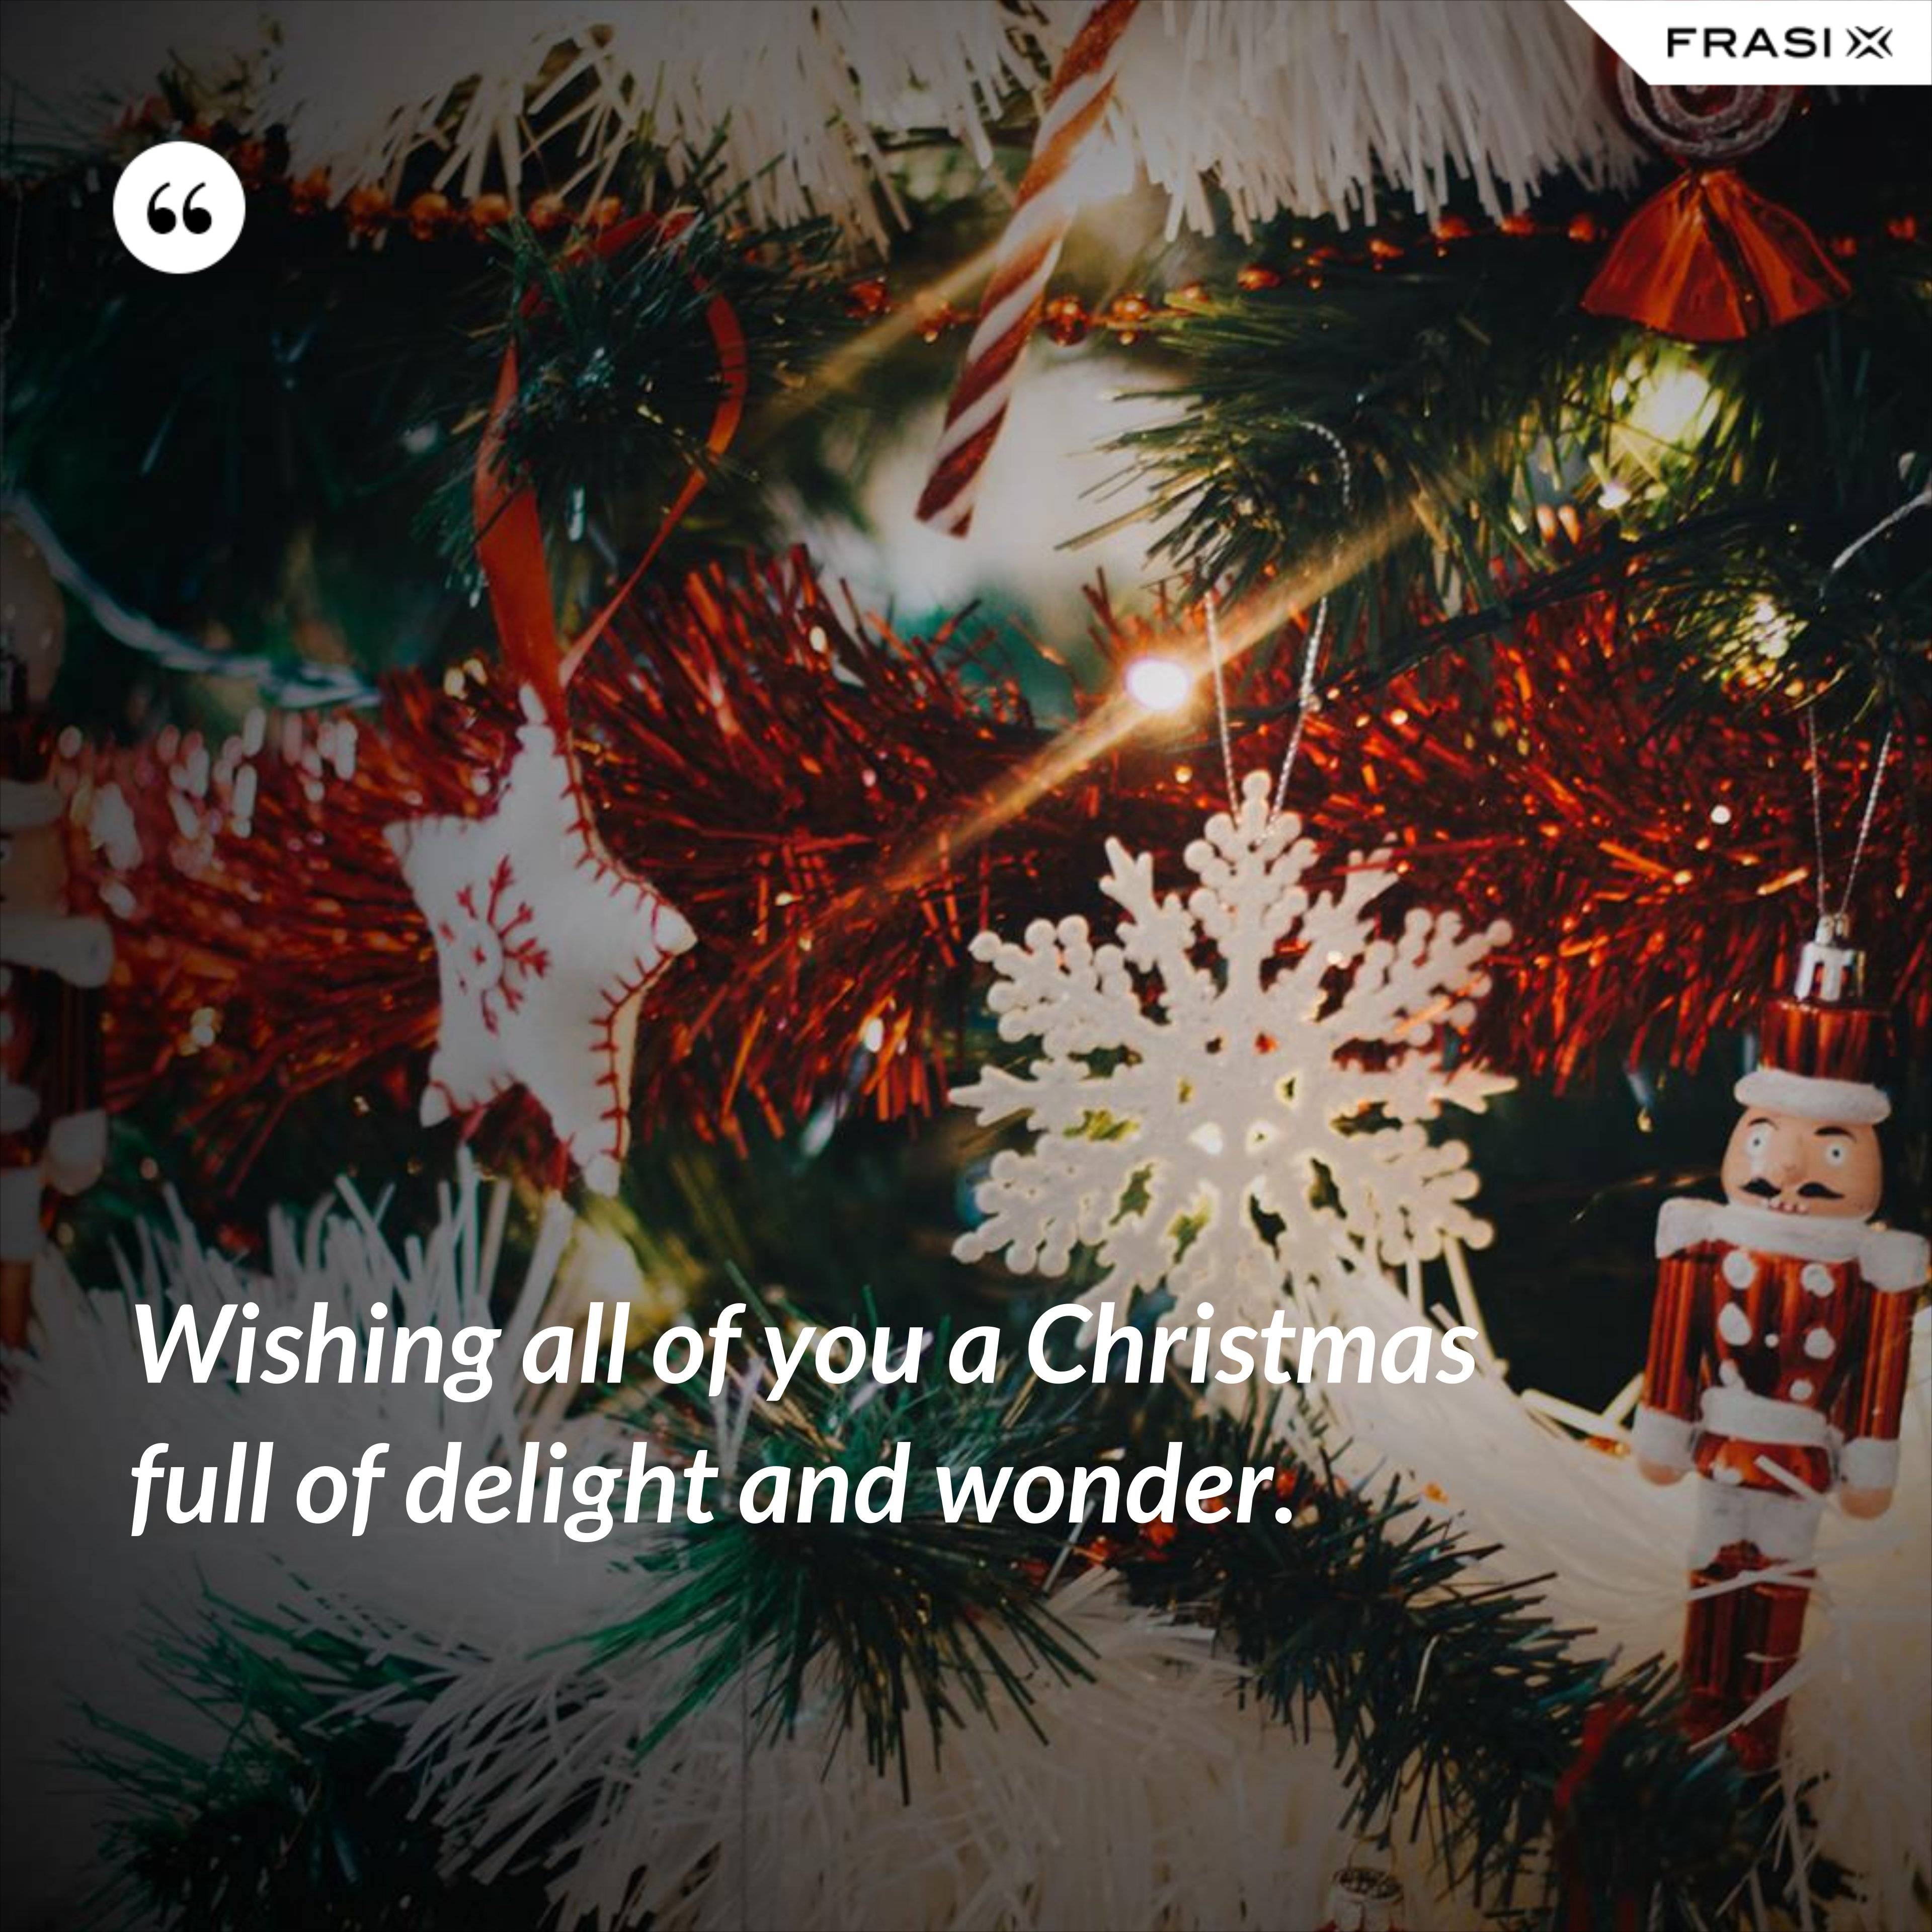 Wishing all of you a Christmas full of delight and wonder. - Anonimo